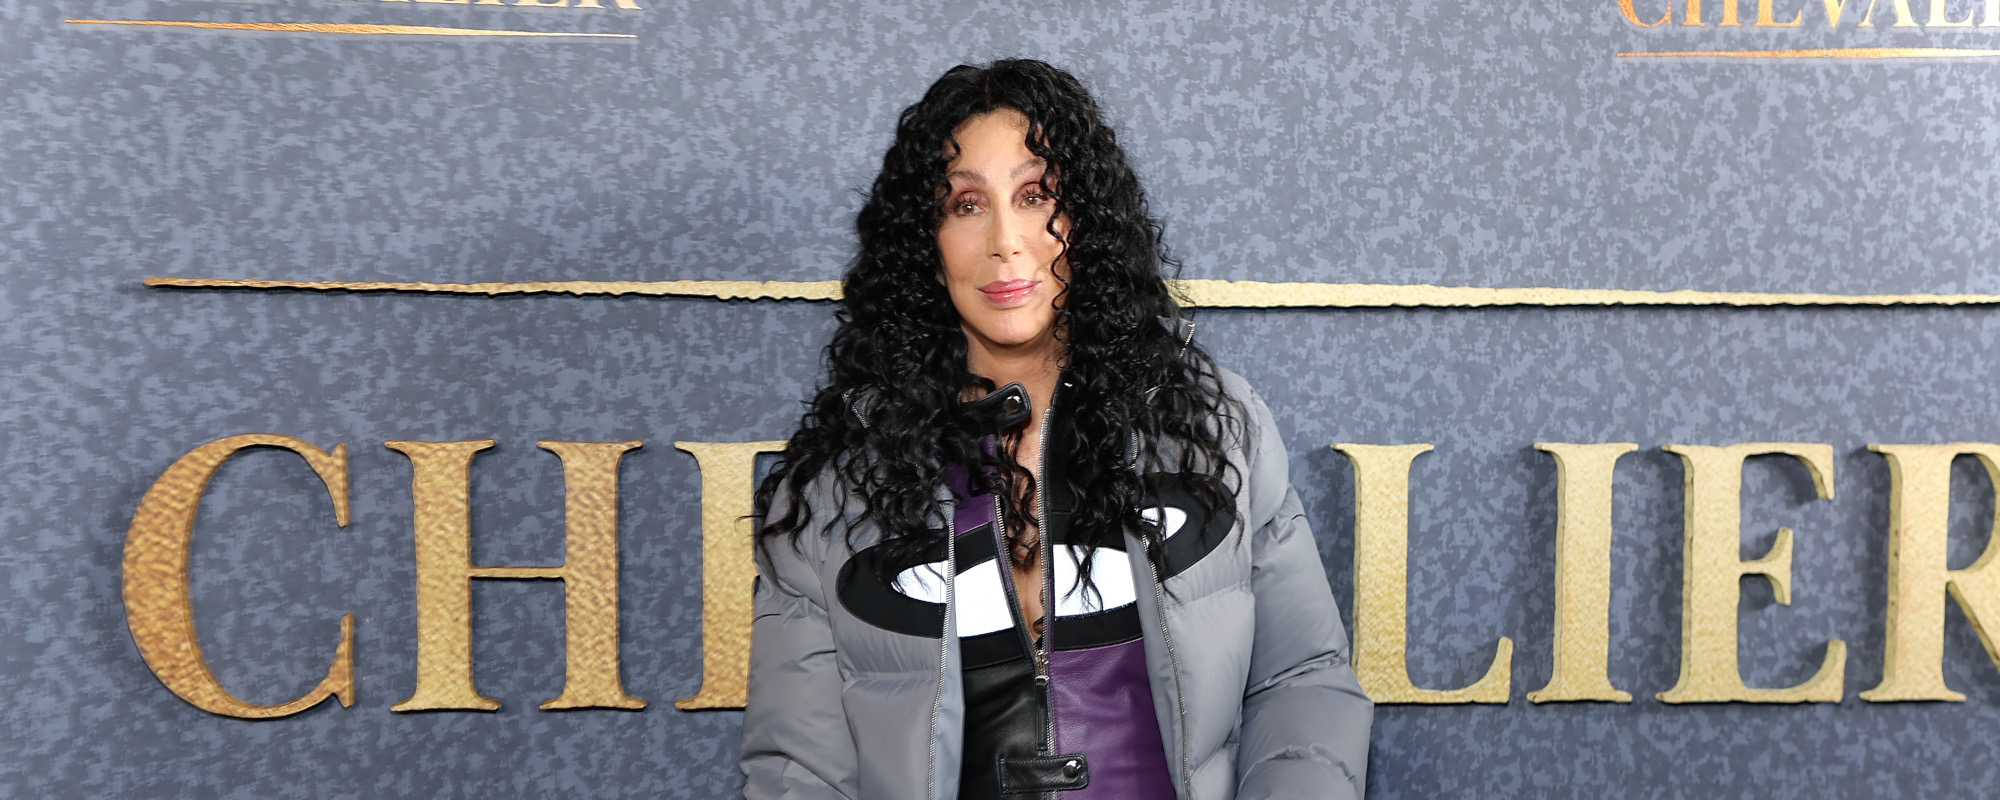 Cher Announces Deluxe Limited-Edition of ‘It’s A Man’s World’